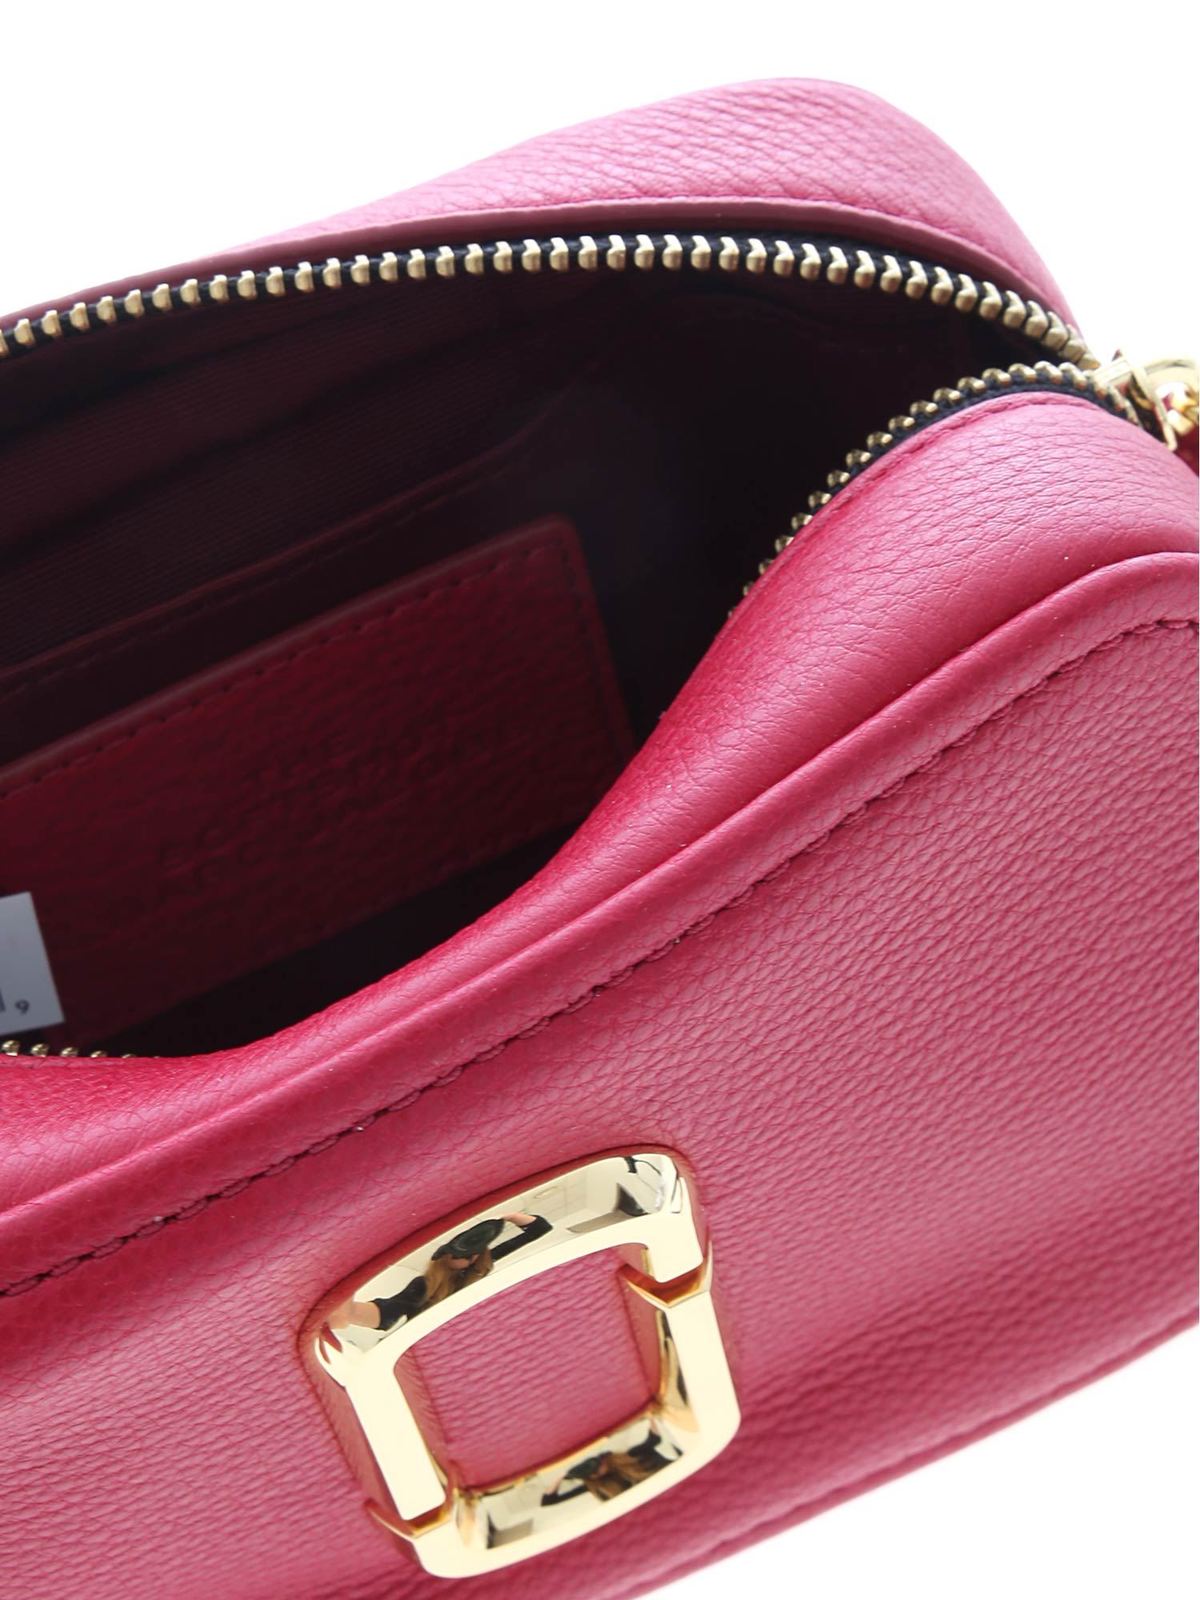 Marc Jacobs The Softshot 17 in Pink